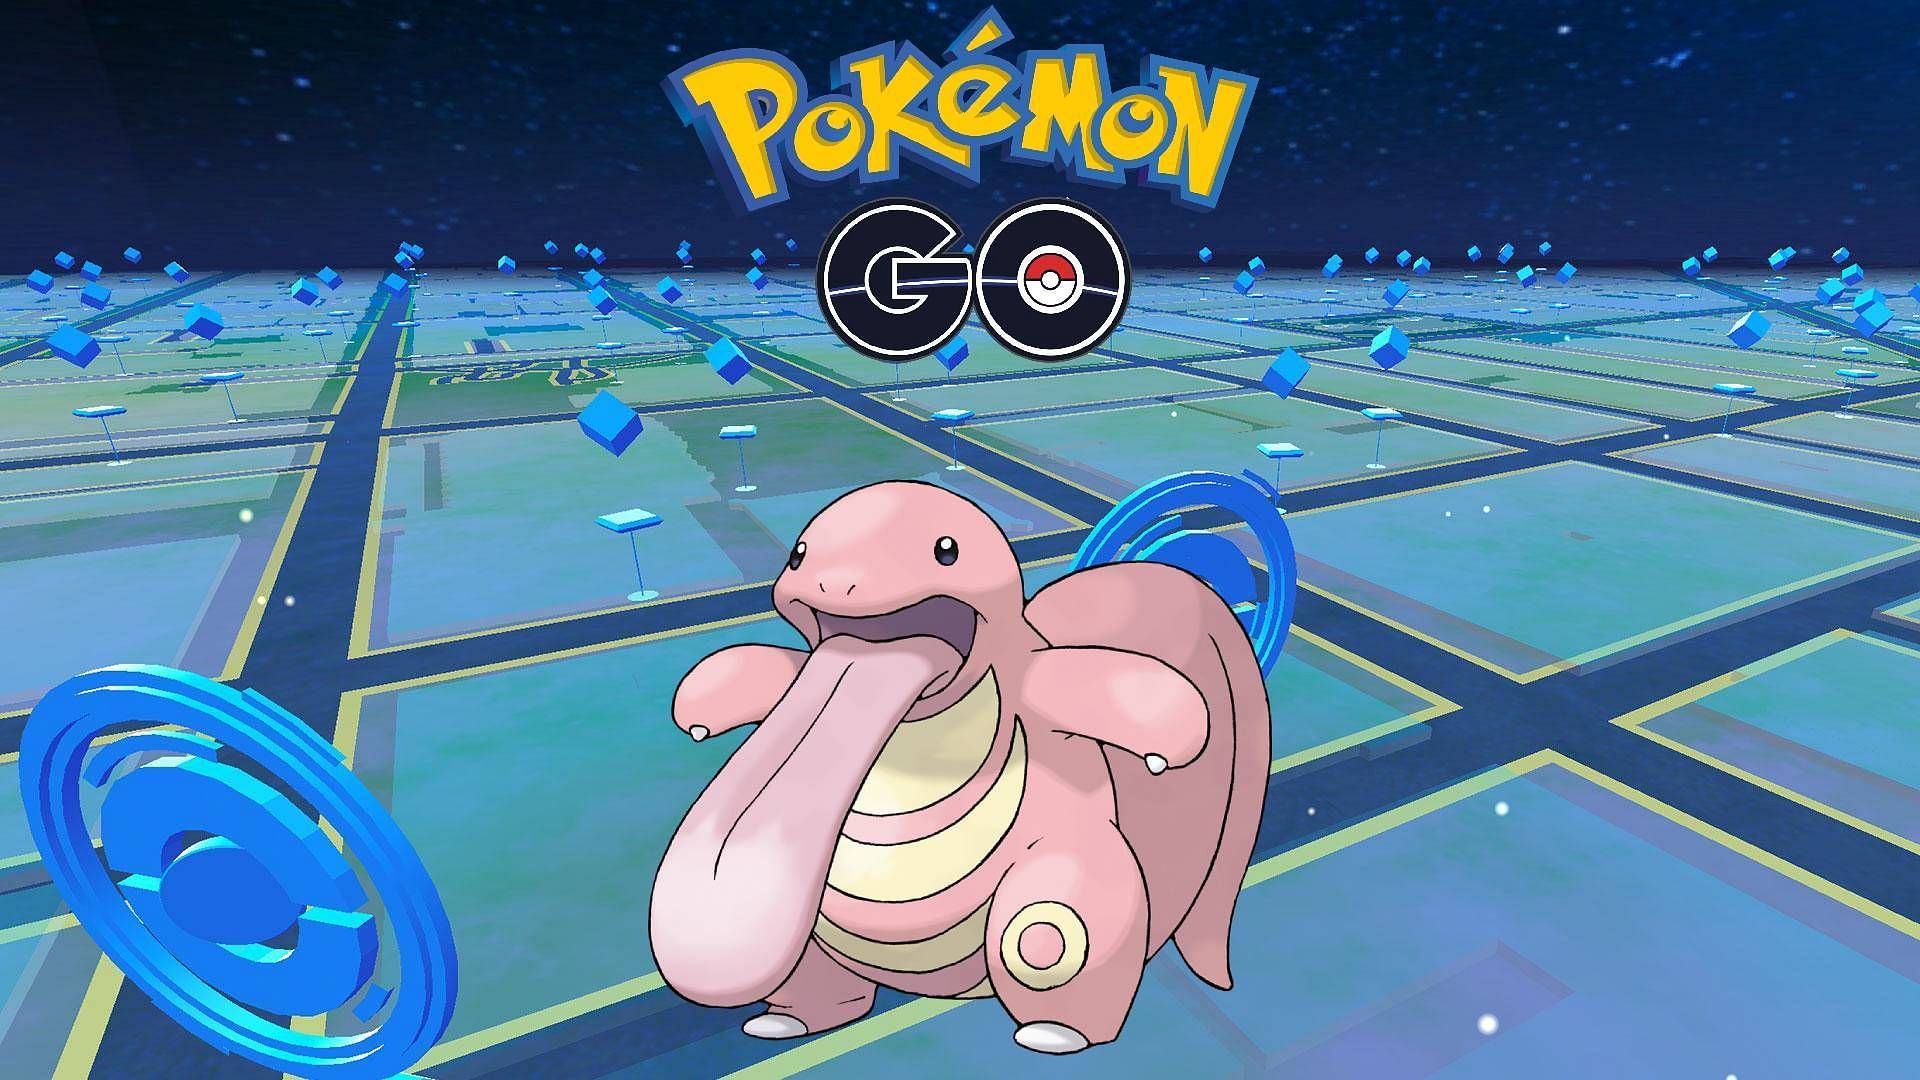 Pokemon GO Lickitung guide: Best counters, weaknesses, and more